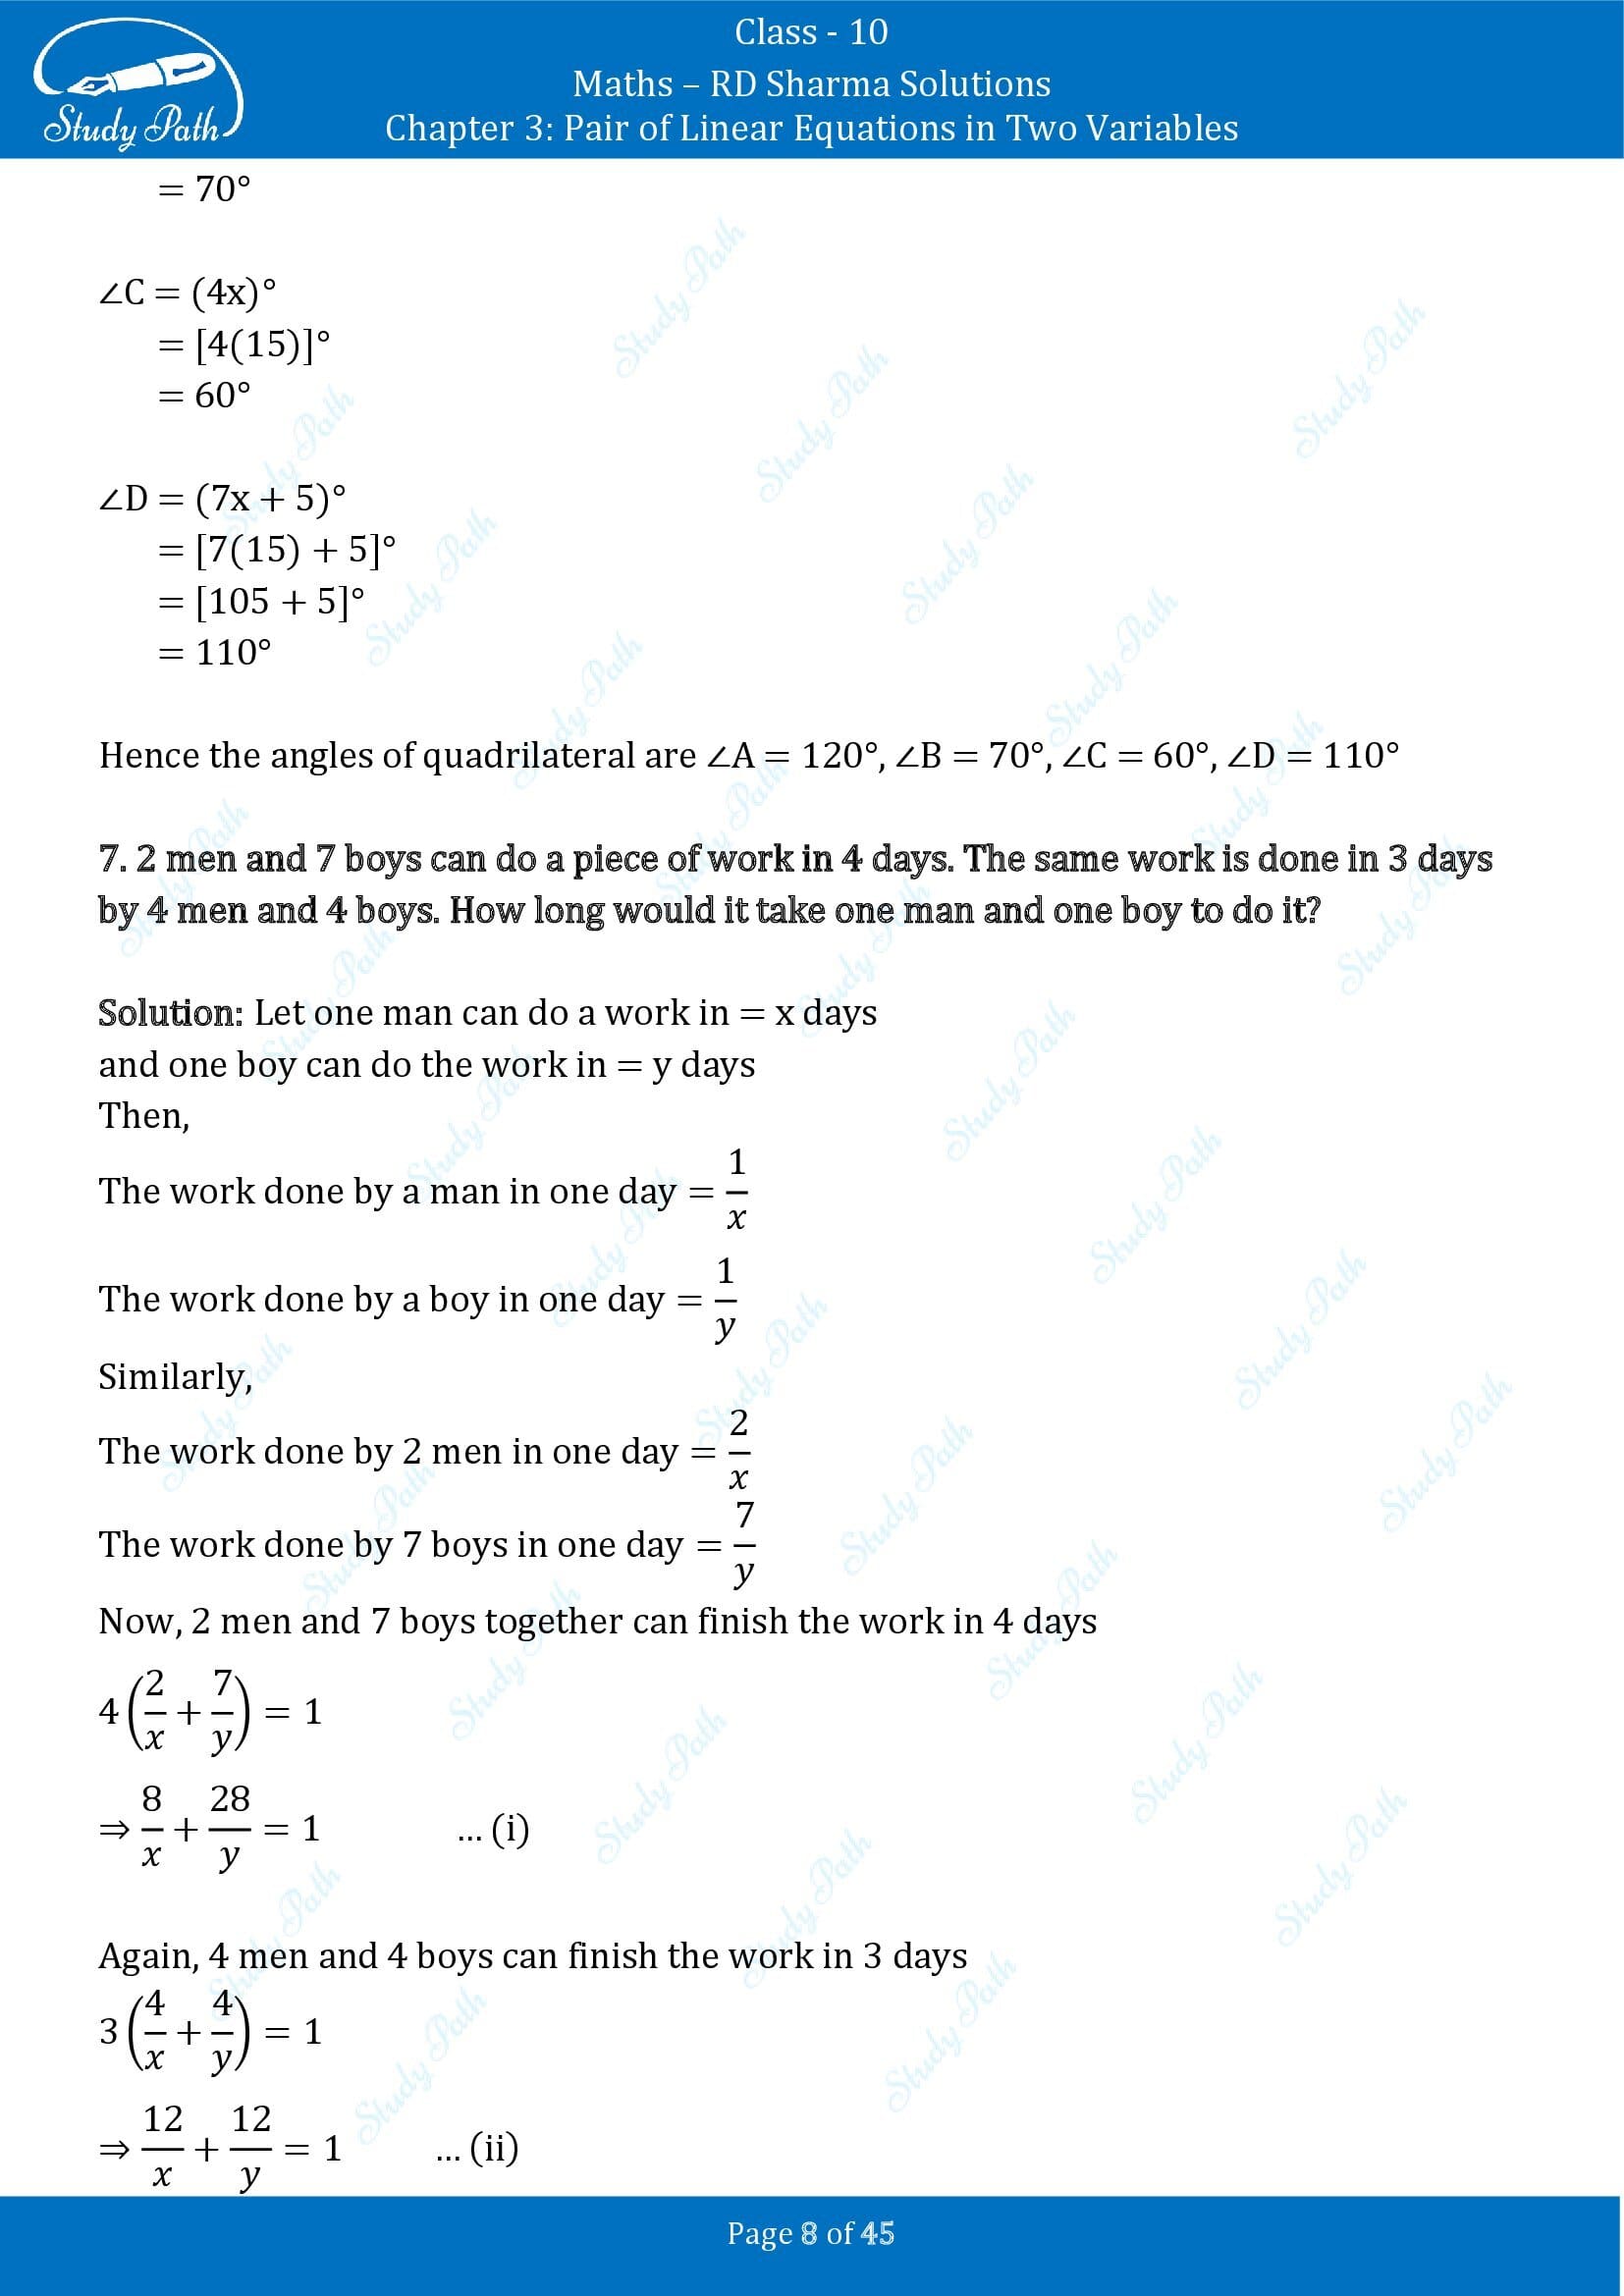 RD Sharma Solutions Class 10 Chapter 3 Pair of Linear Equations in Two Variables Exercise 3.11 00008